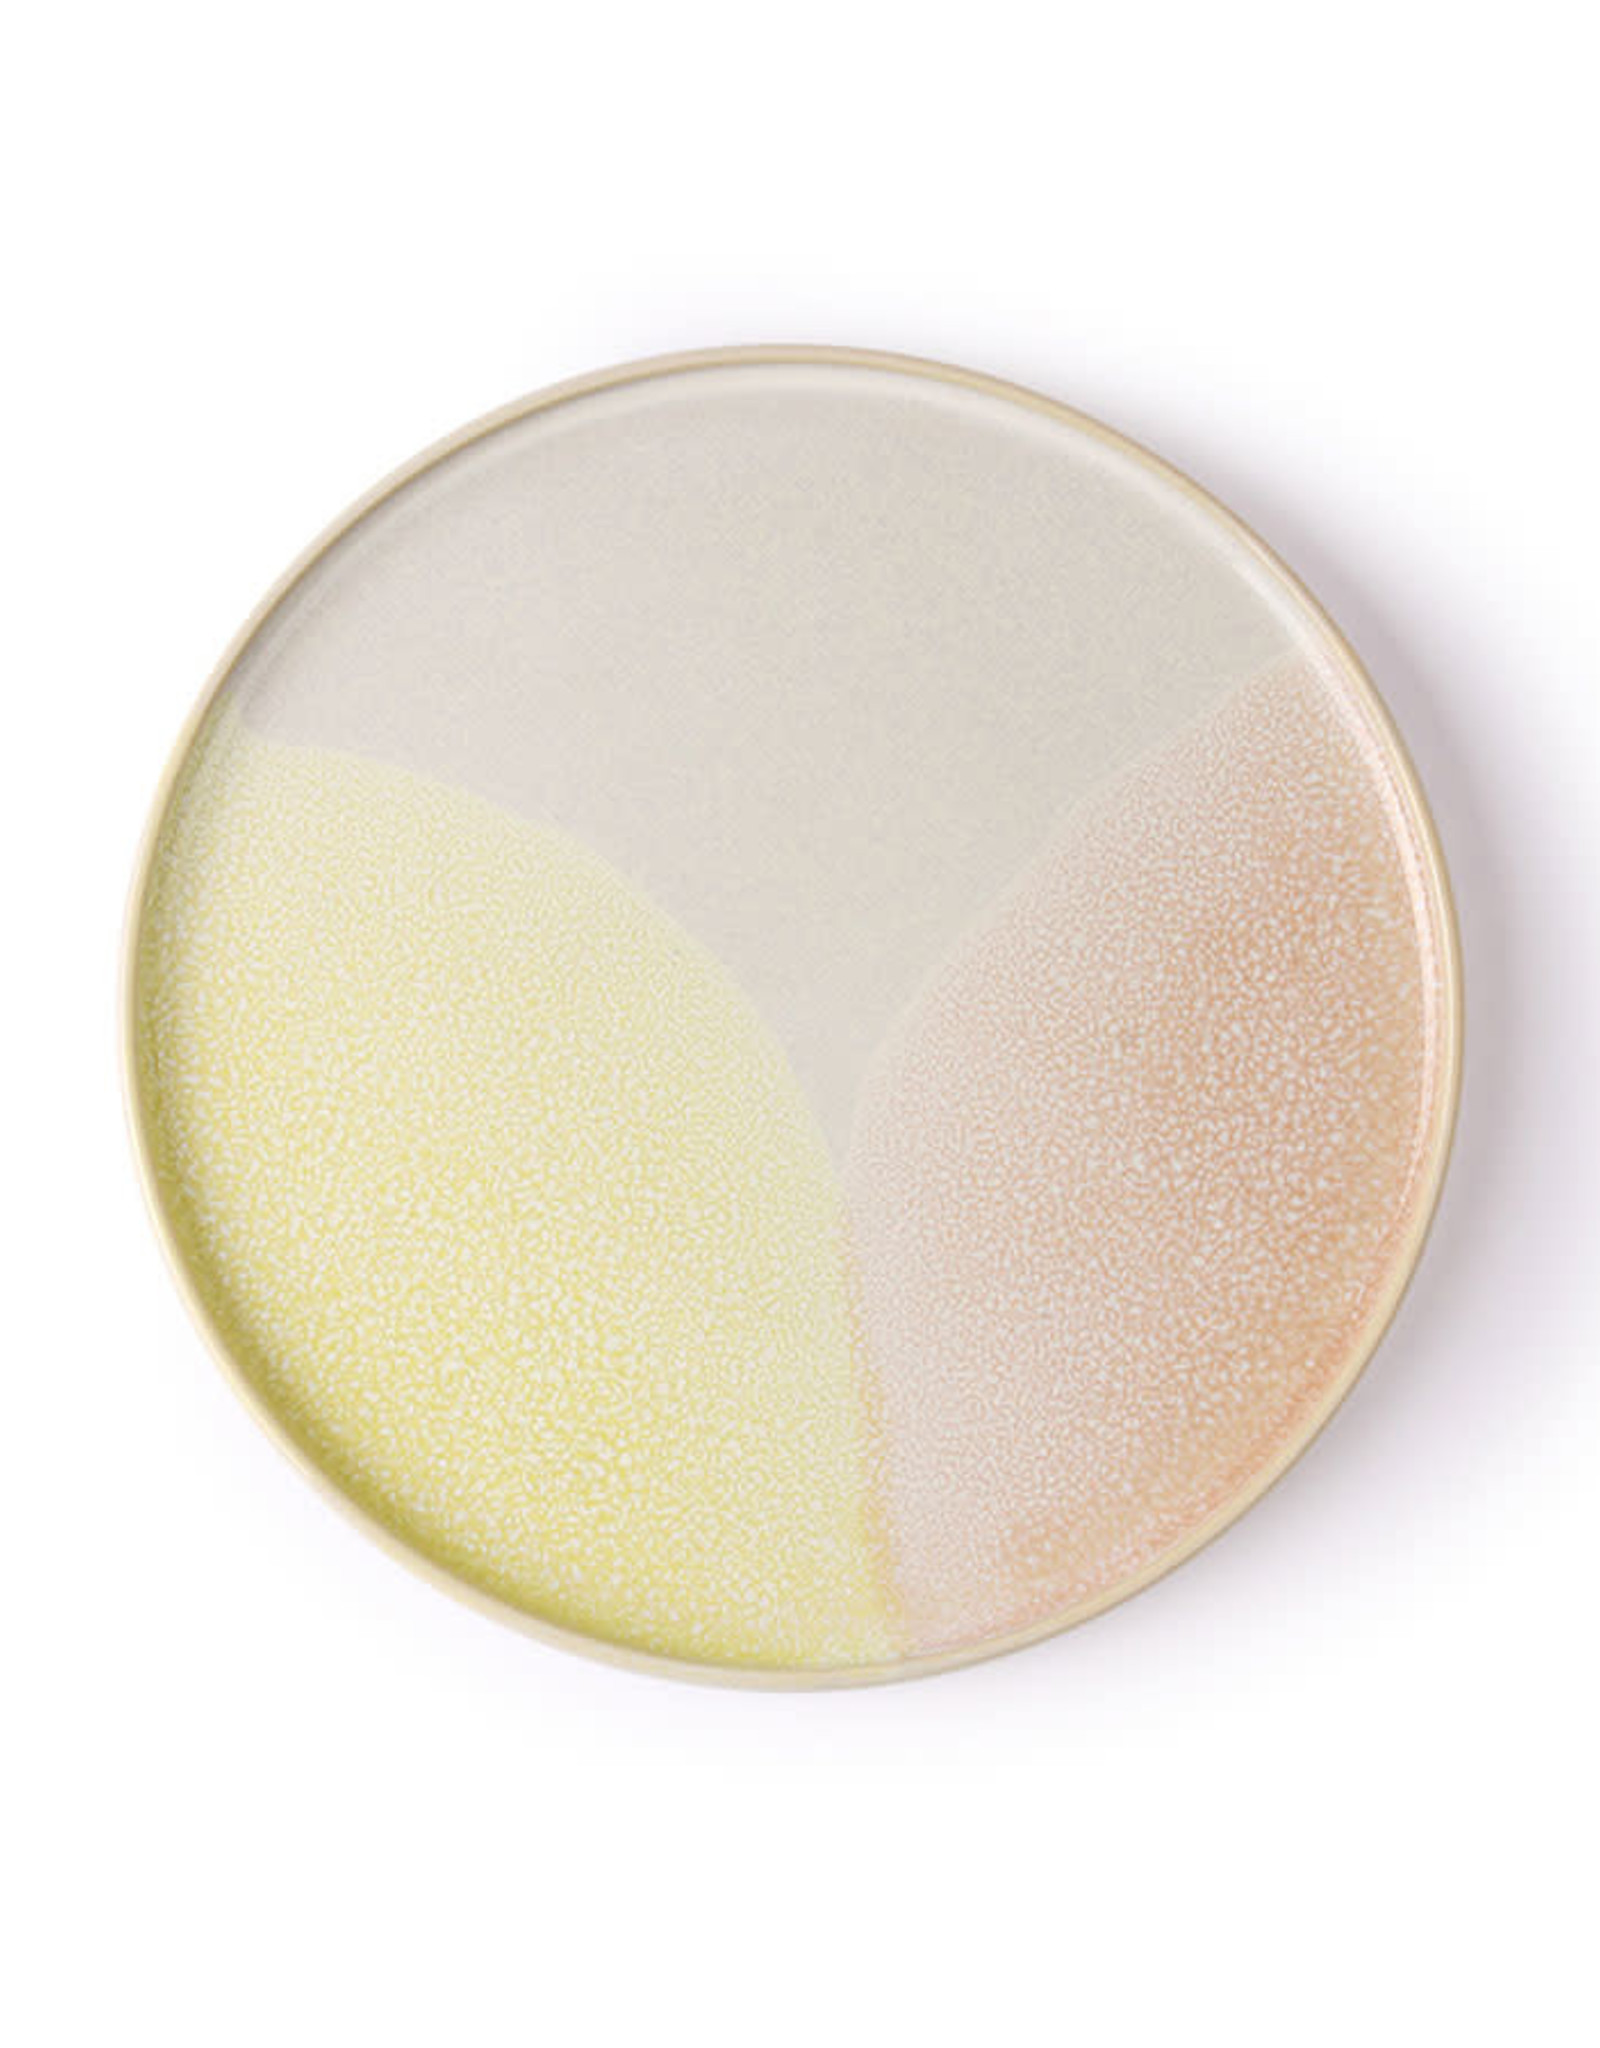 HK Living HK Living - Gallery ceramics,  round side plate pink/yellow